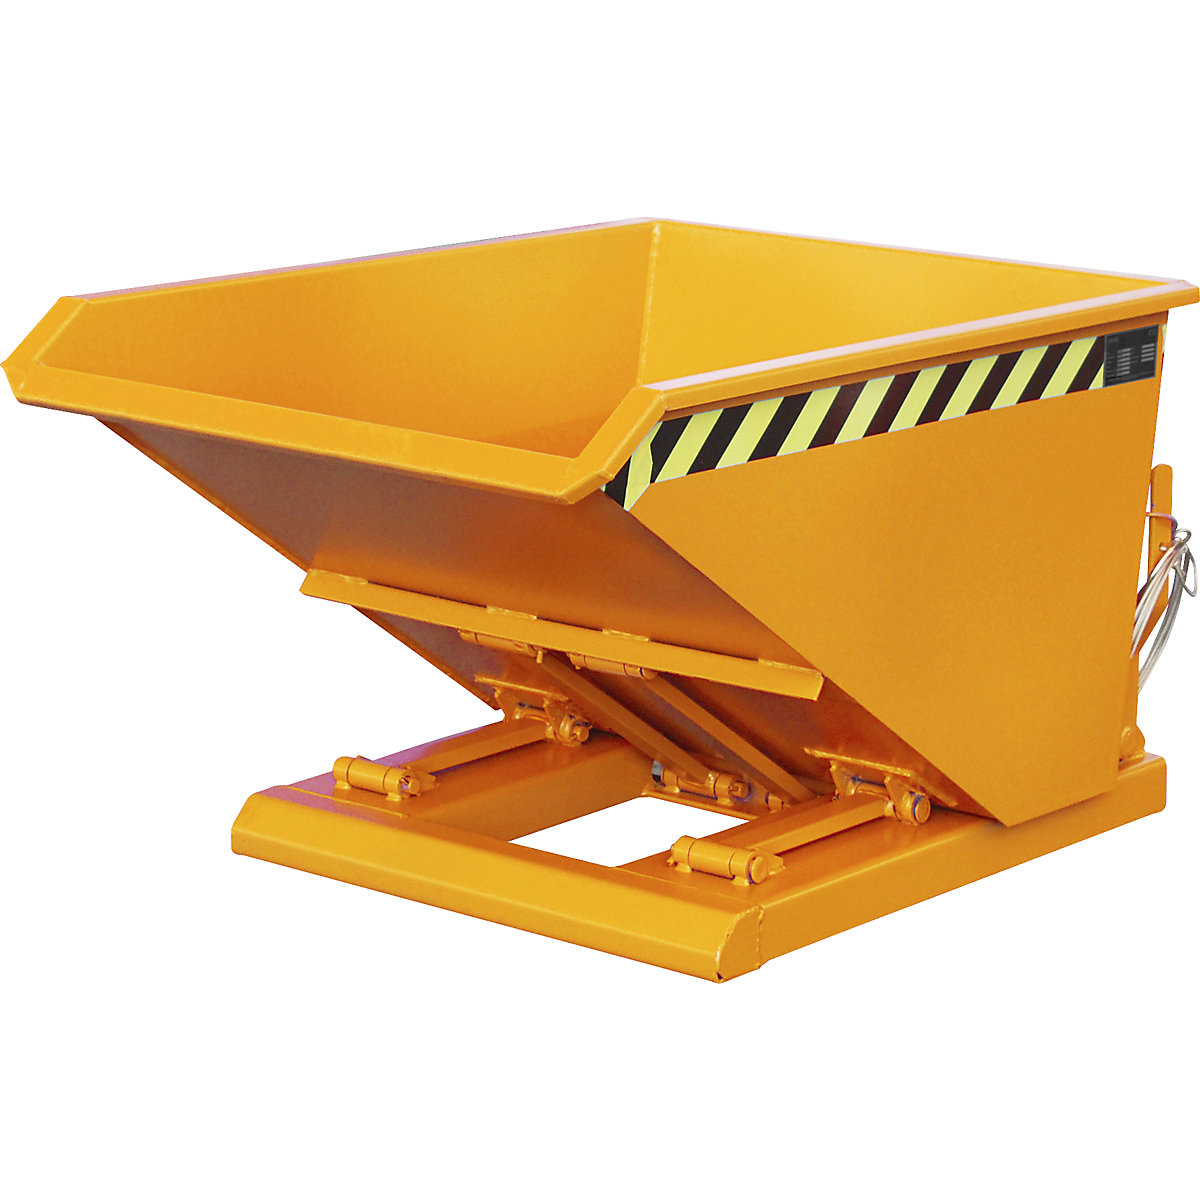 Tilting skip, extremely low overall height, without wheels - eurokraft pro